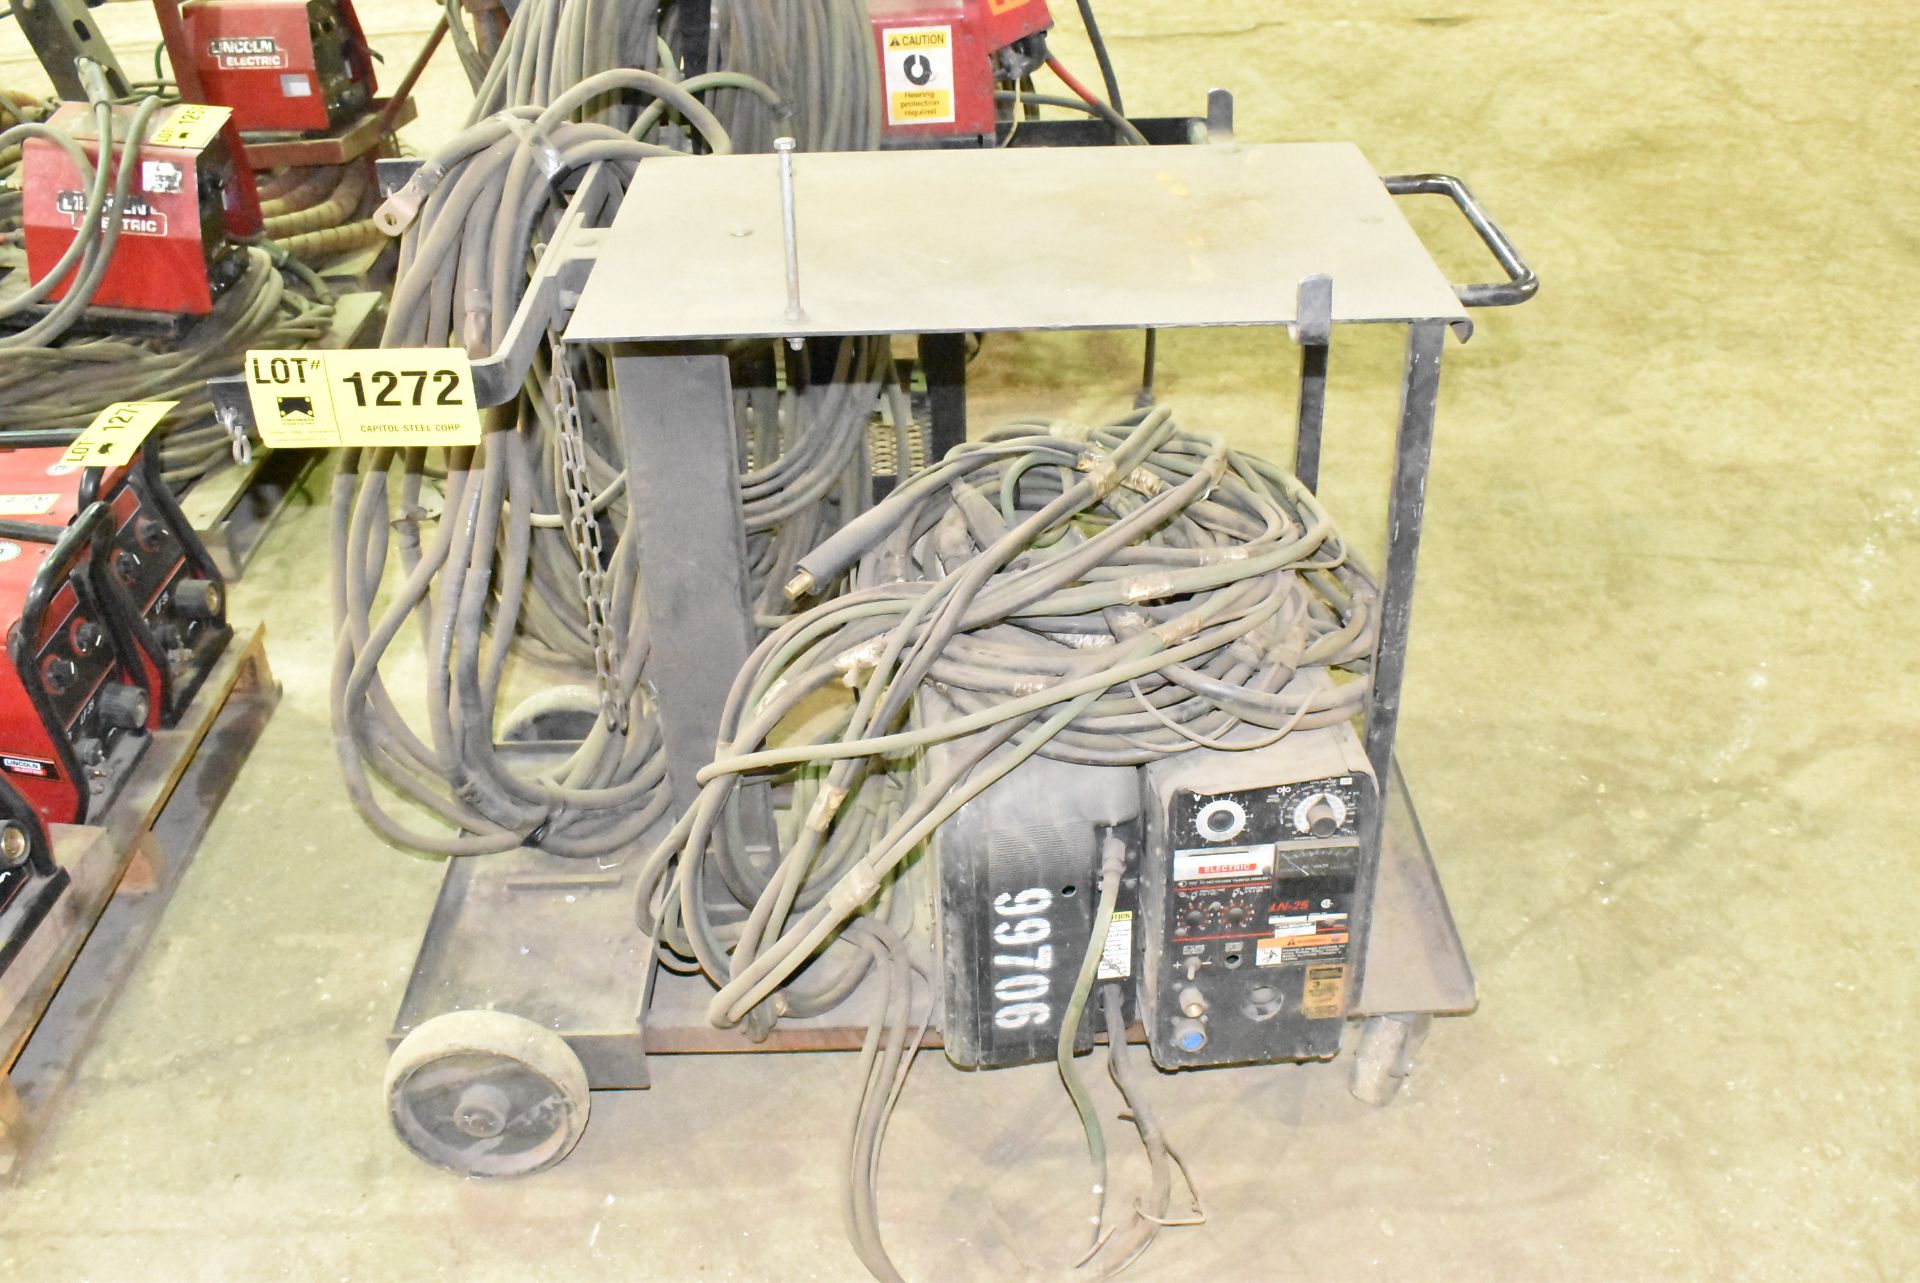 LOT/ (2) LINCOLN ELECTIRC LN-25 WIRE FEEDERS WITH CABLES & CART [RIGGING FEES FOR LOT #1272 - $30 - Image 2 of 6